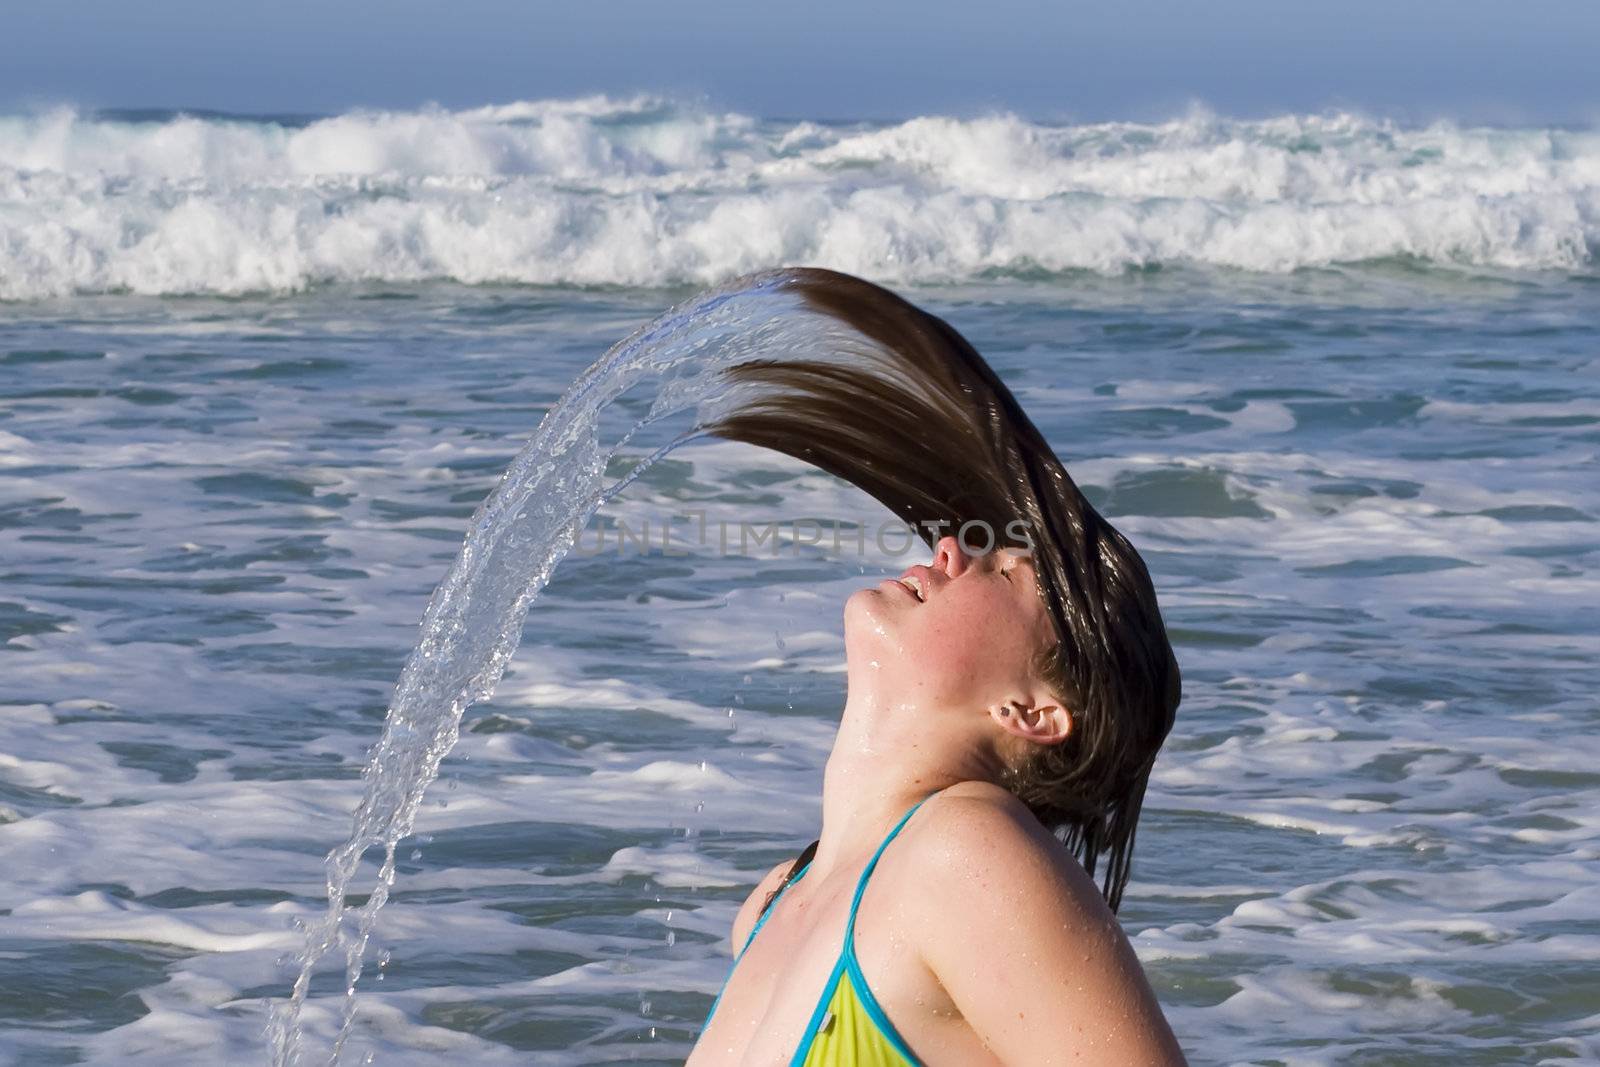 Bikini model fling her head back, with hair drenched in water